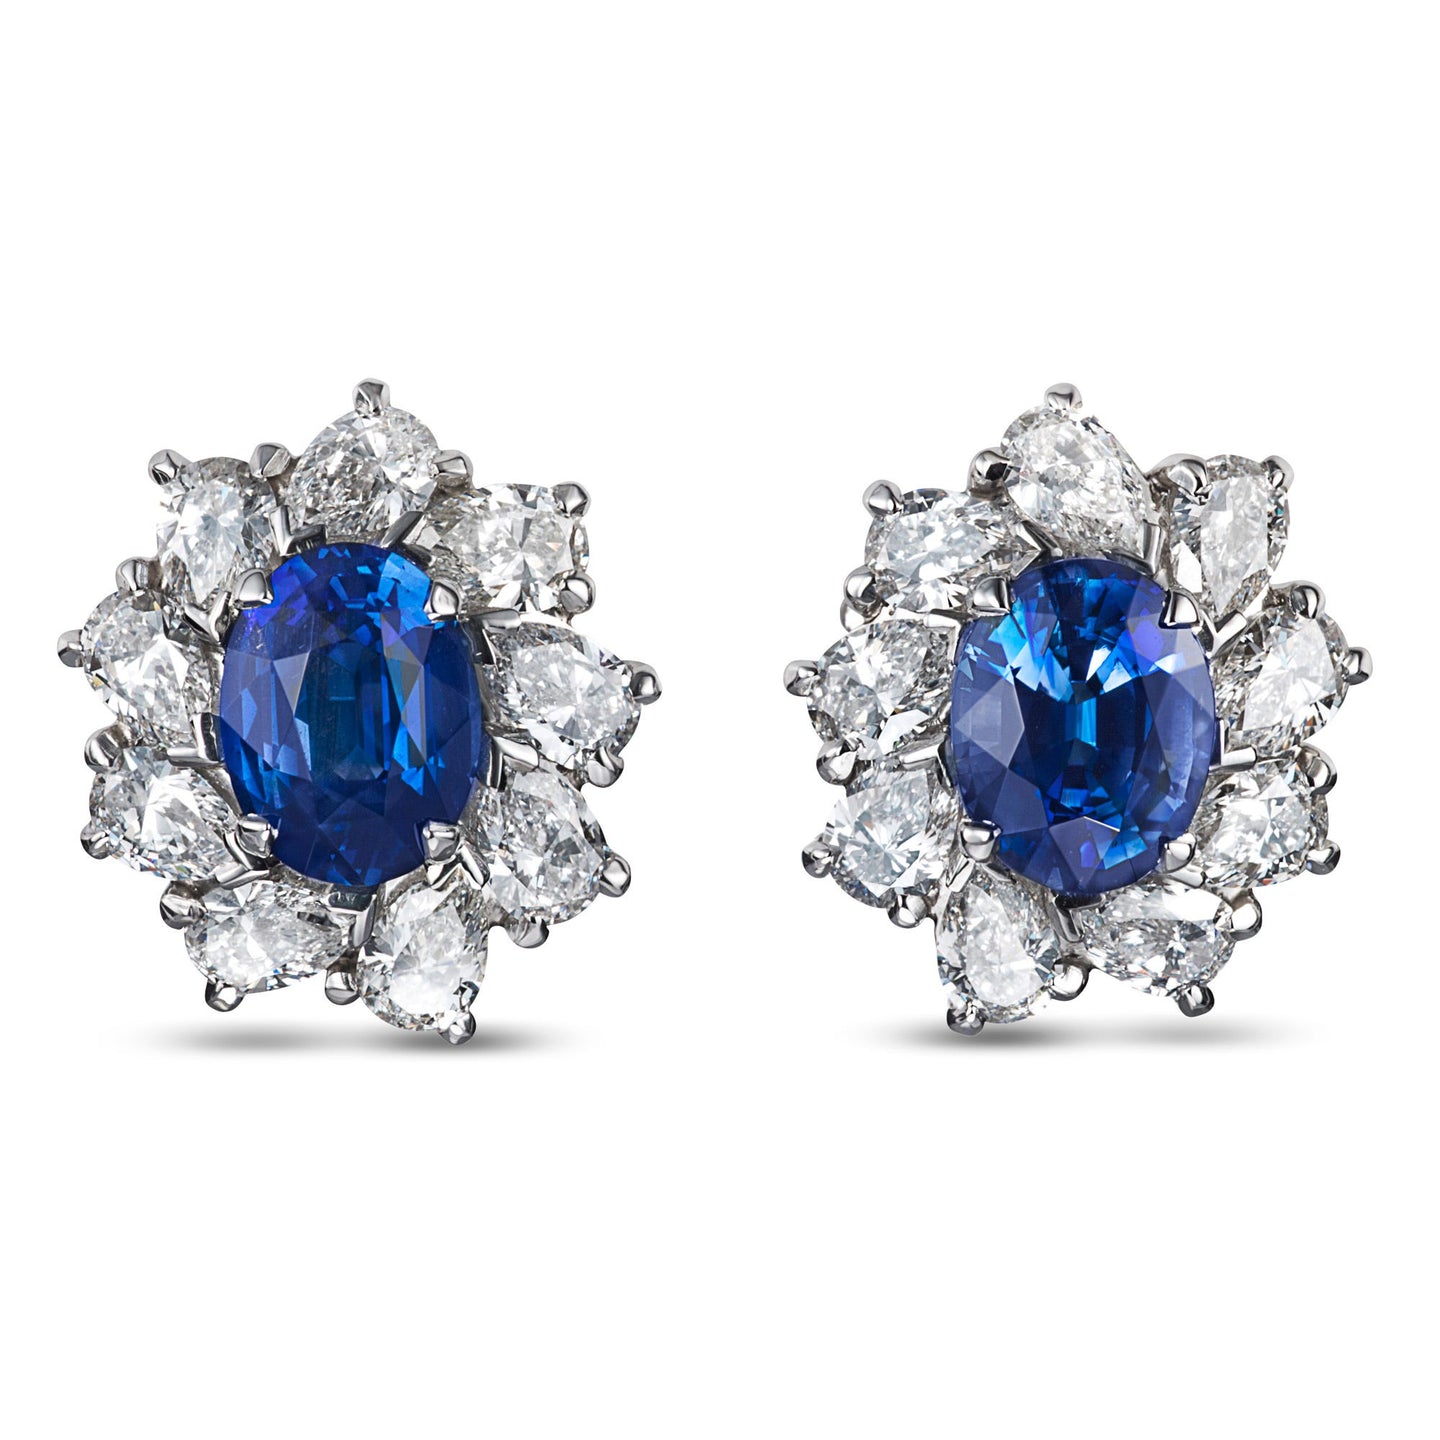 Earrings in Platinum with Oval Sapphire